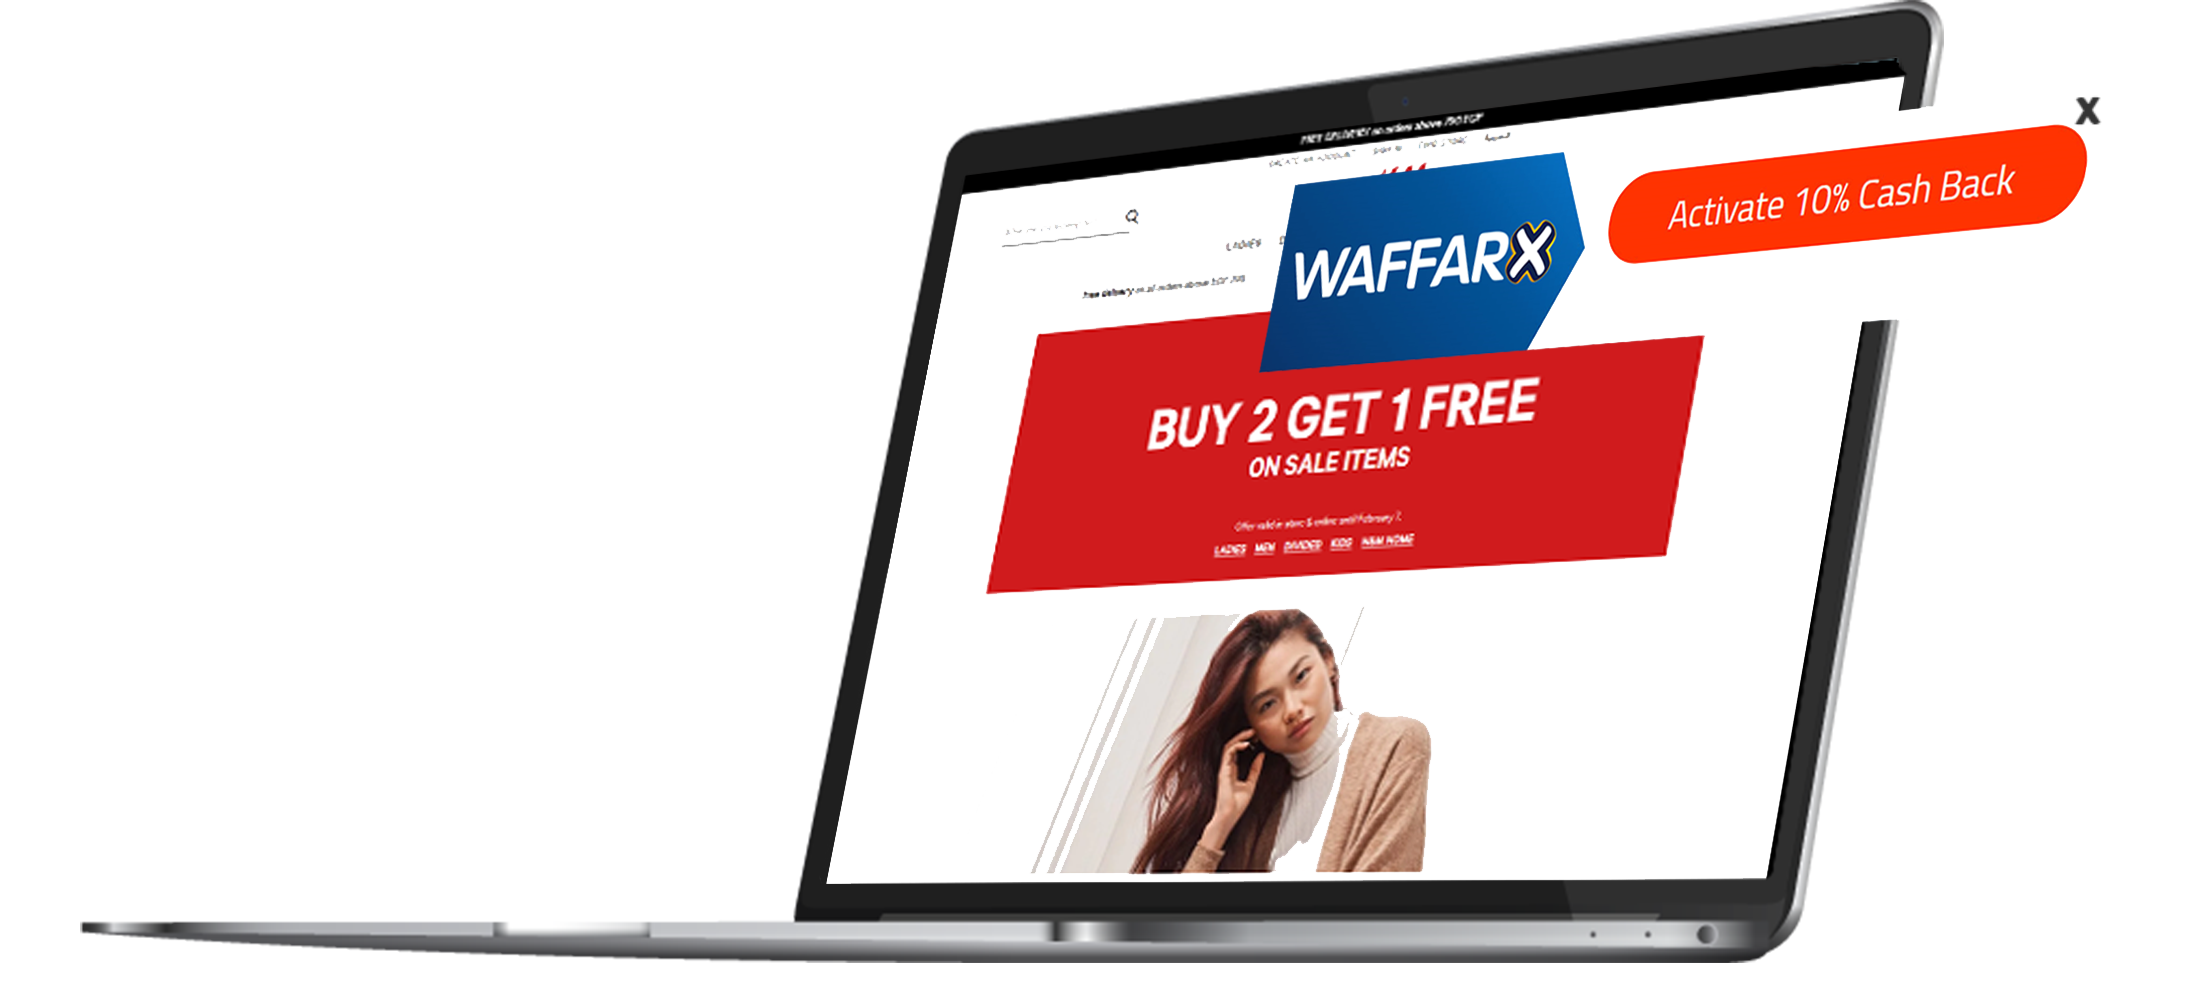 Get Cash Back on every purchase at WaffarX!